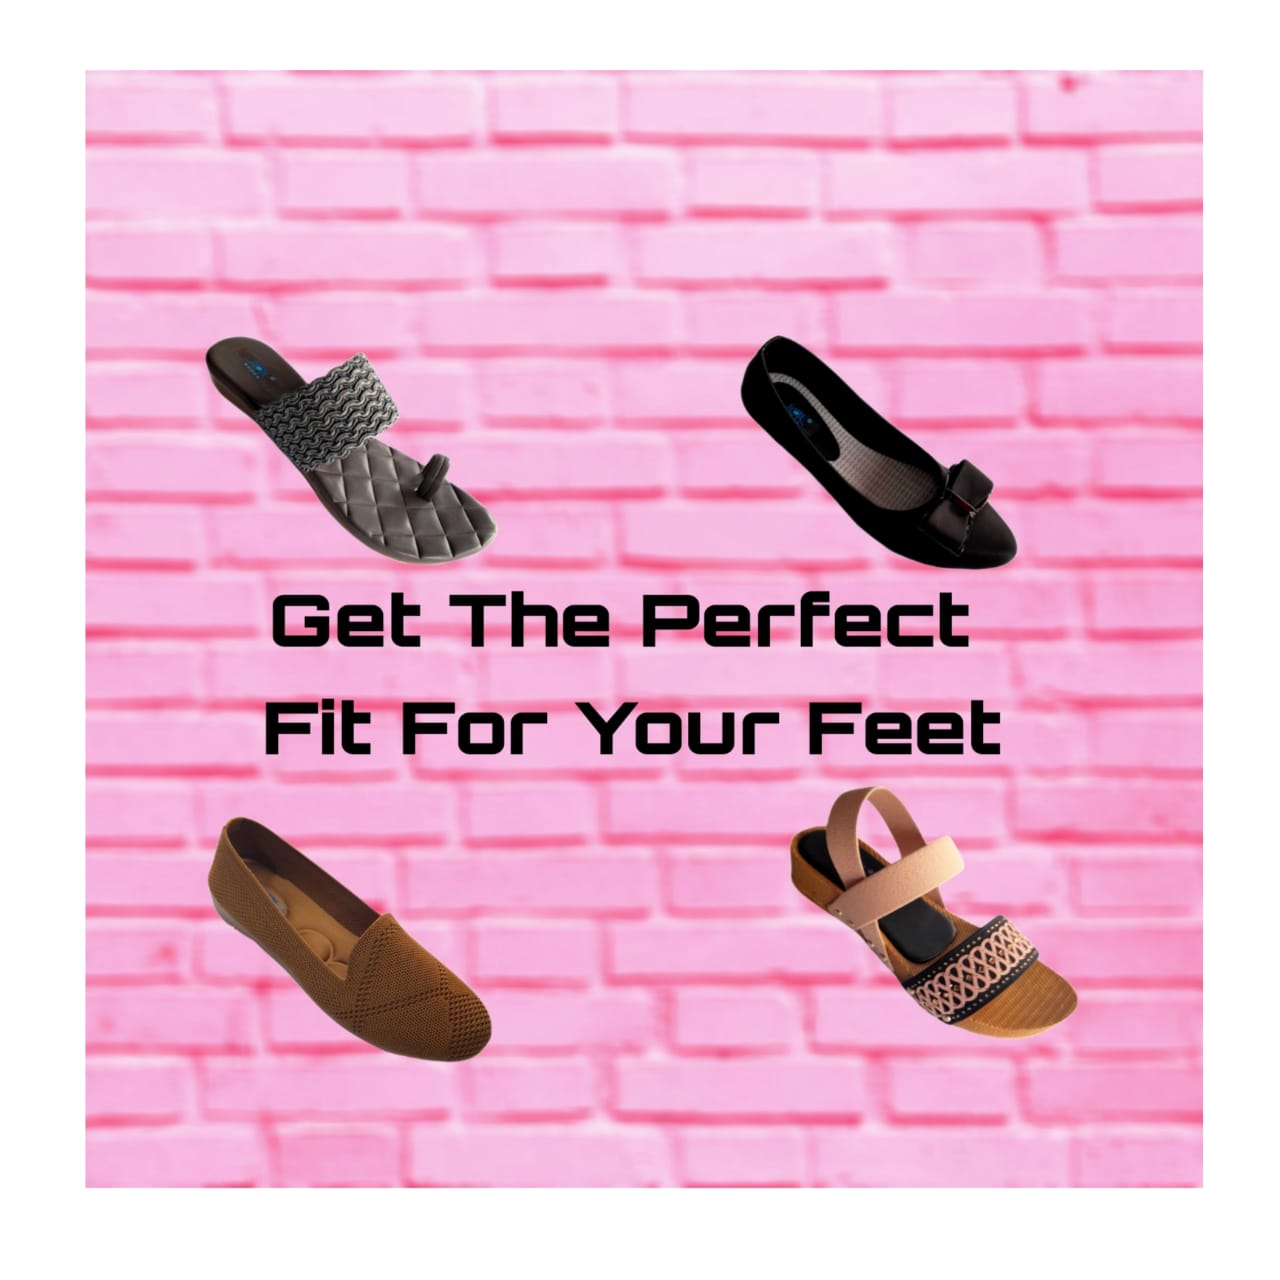 Get The Perfect fit for your feet at Jal shoes